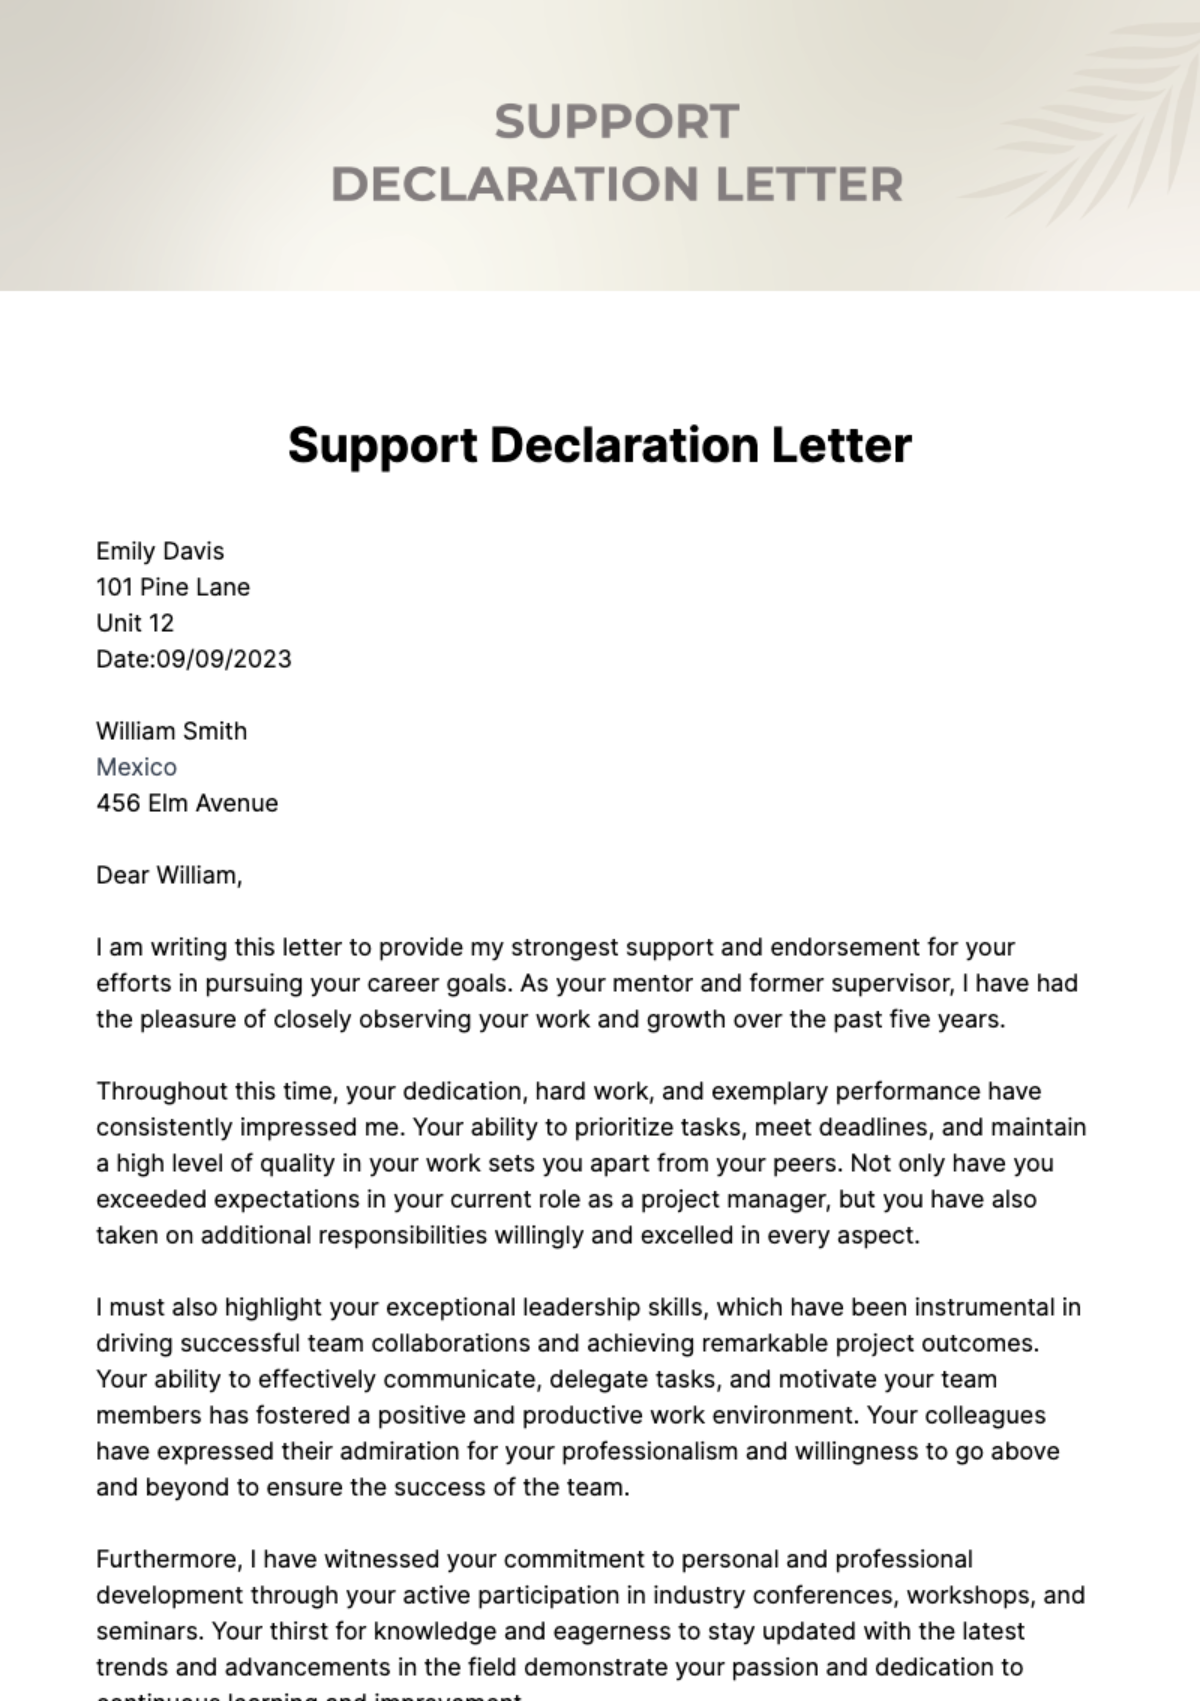 Free Support Declaration Letter Template